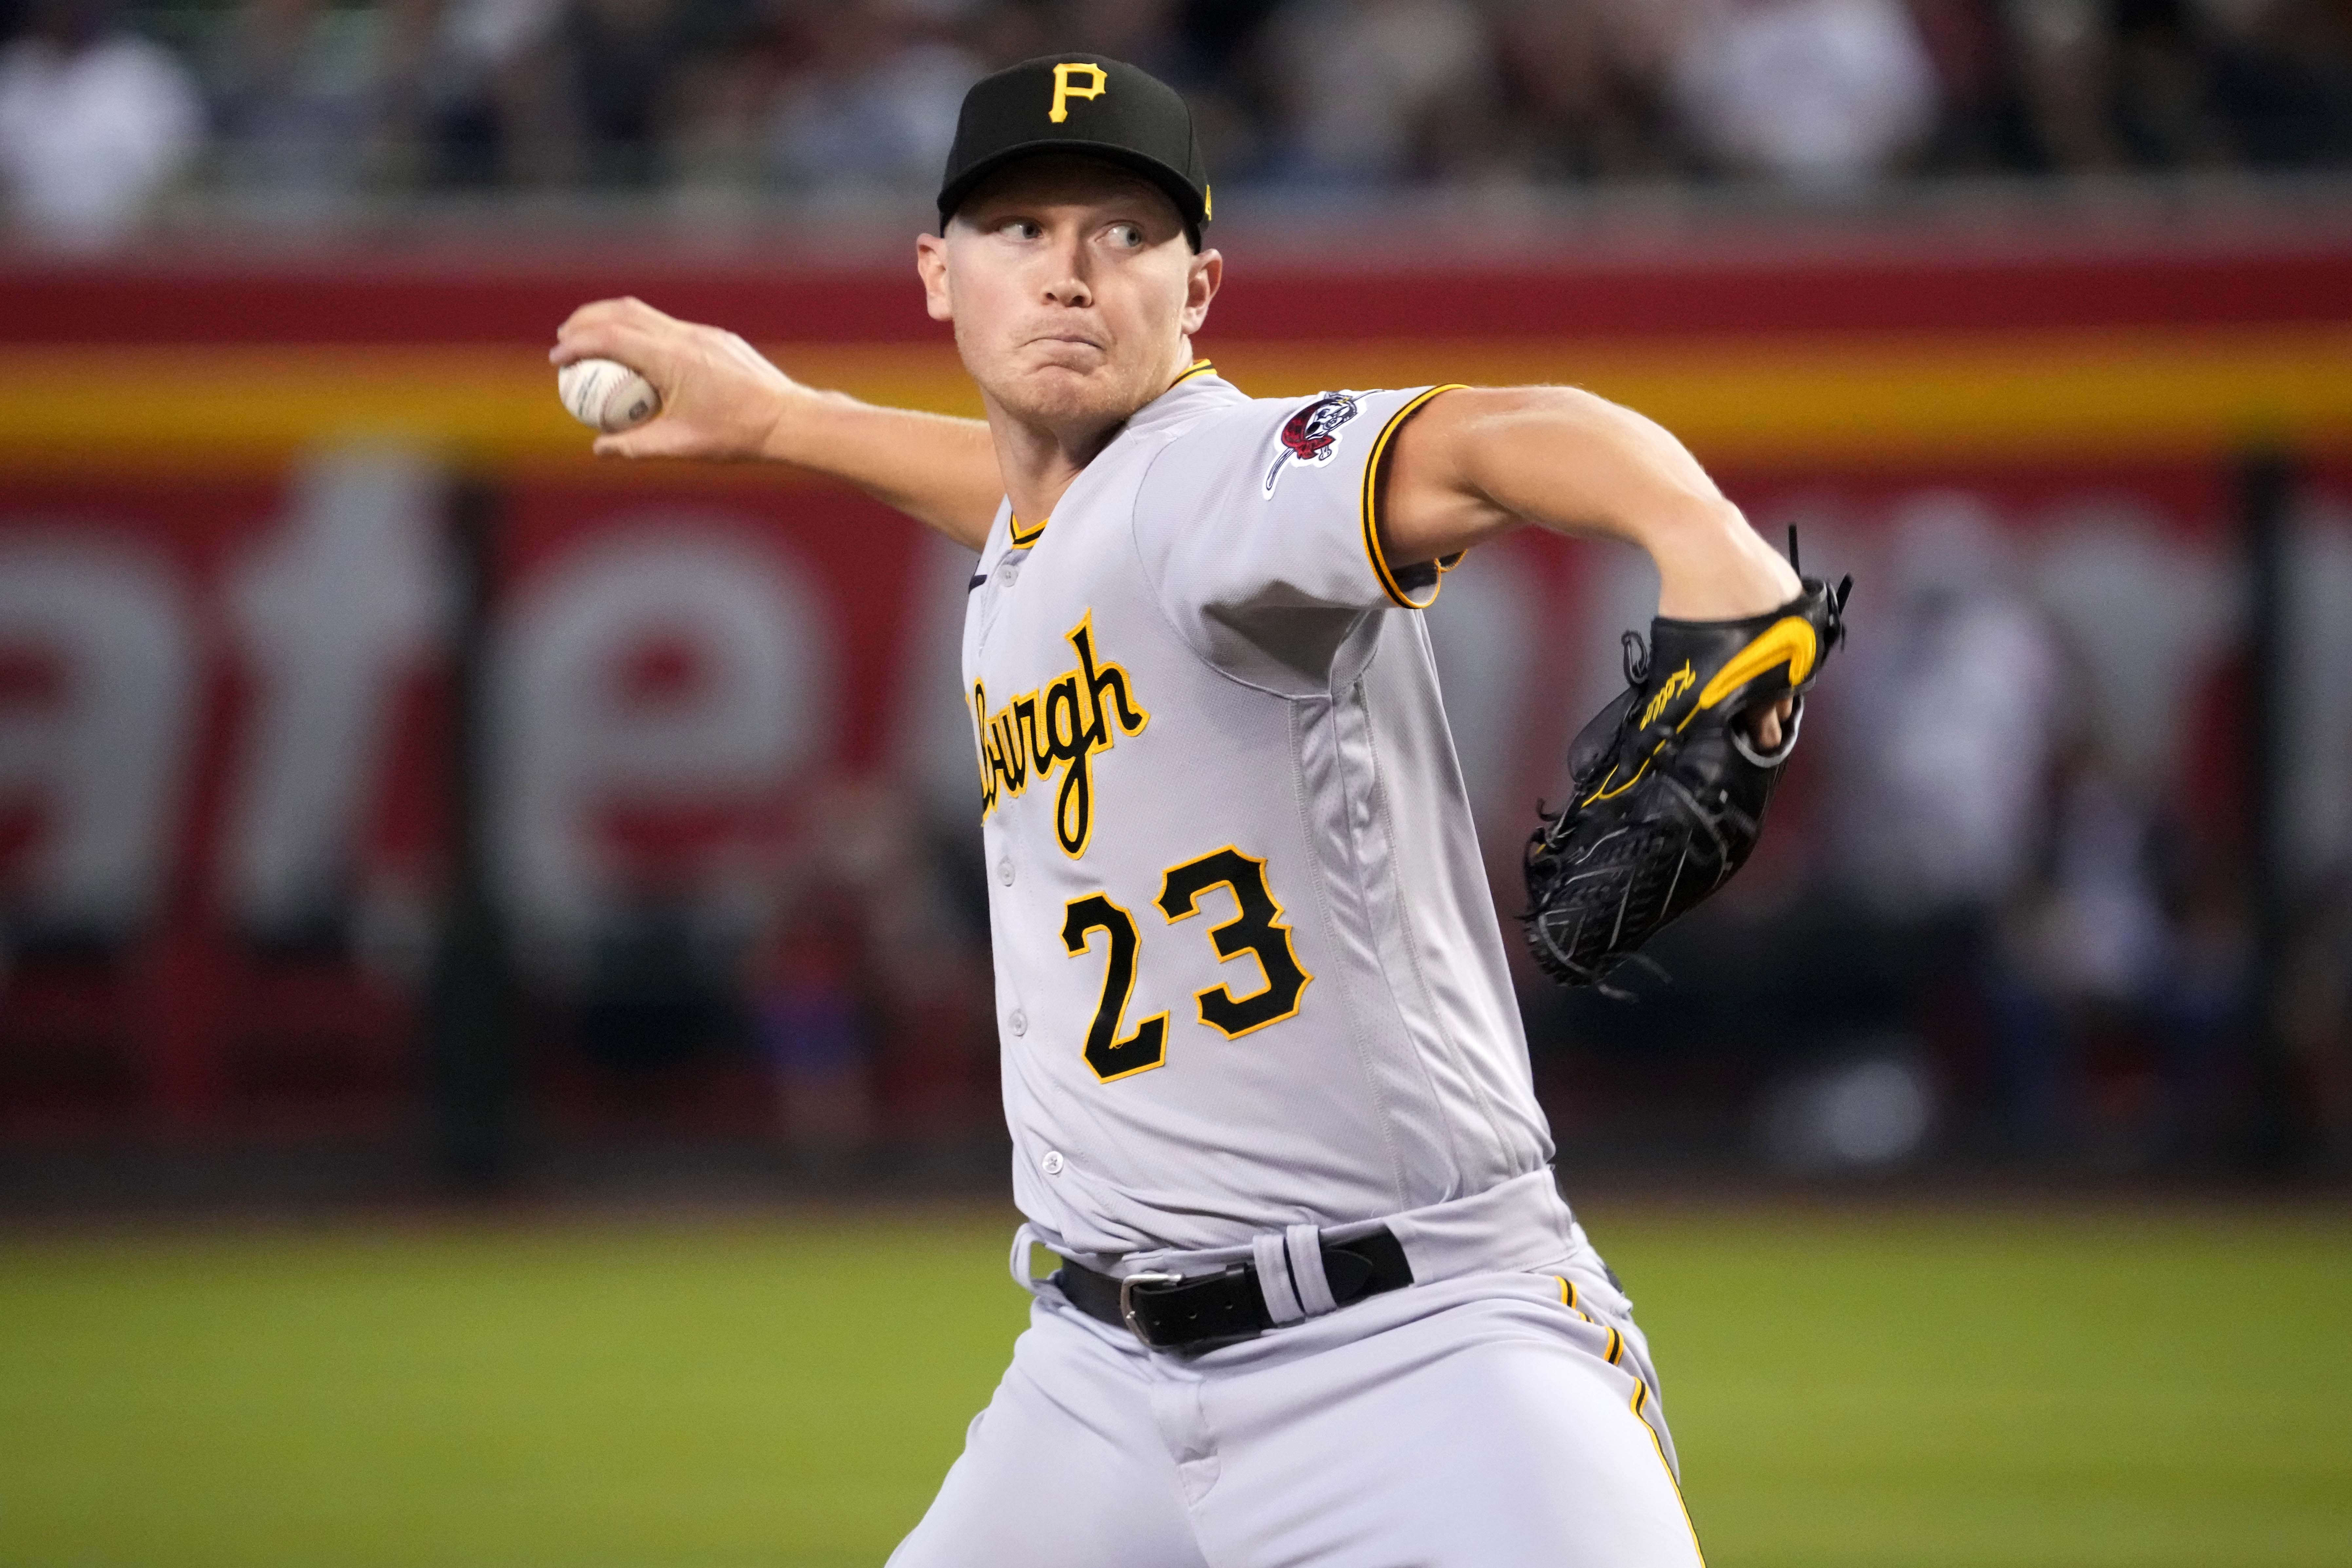 Pirates closer Bednar named to All-Star Game roster for 2nd